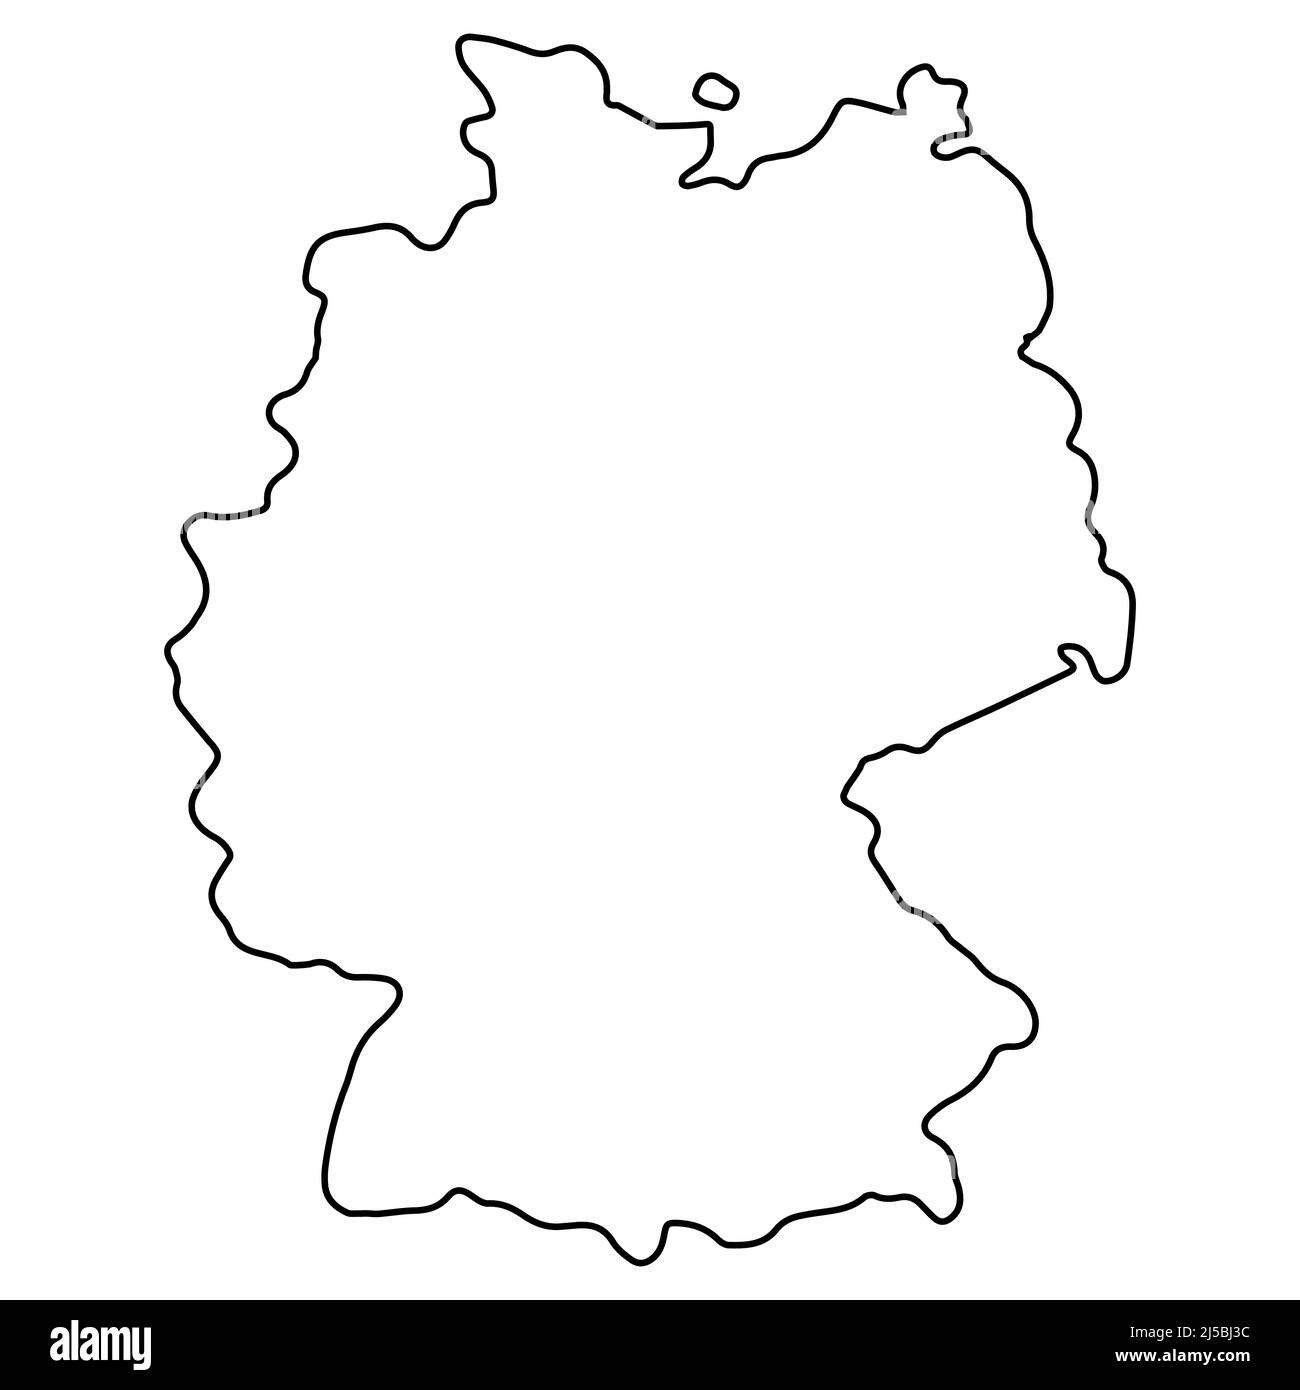 Germany outline map europe Black and White Stock Photos & Images - Alamy